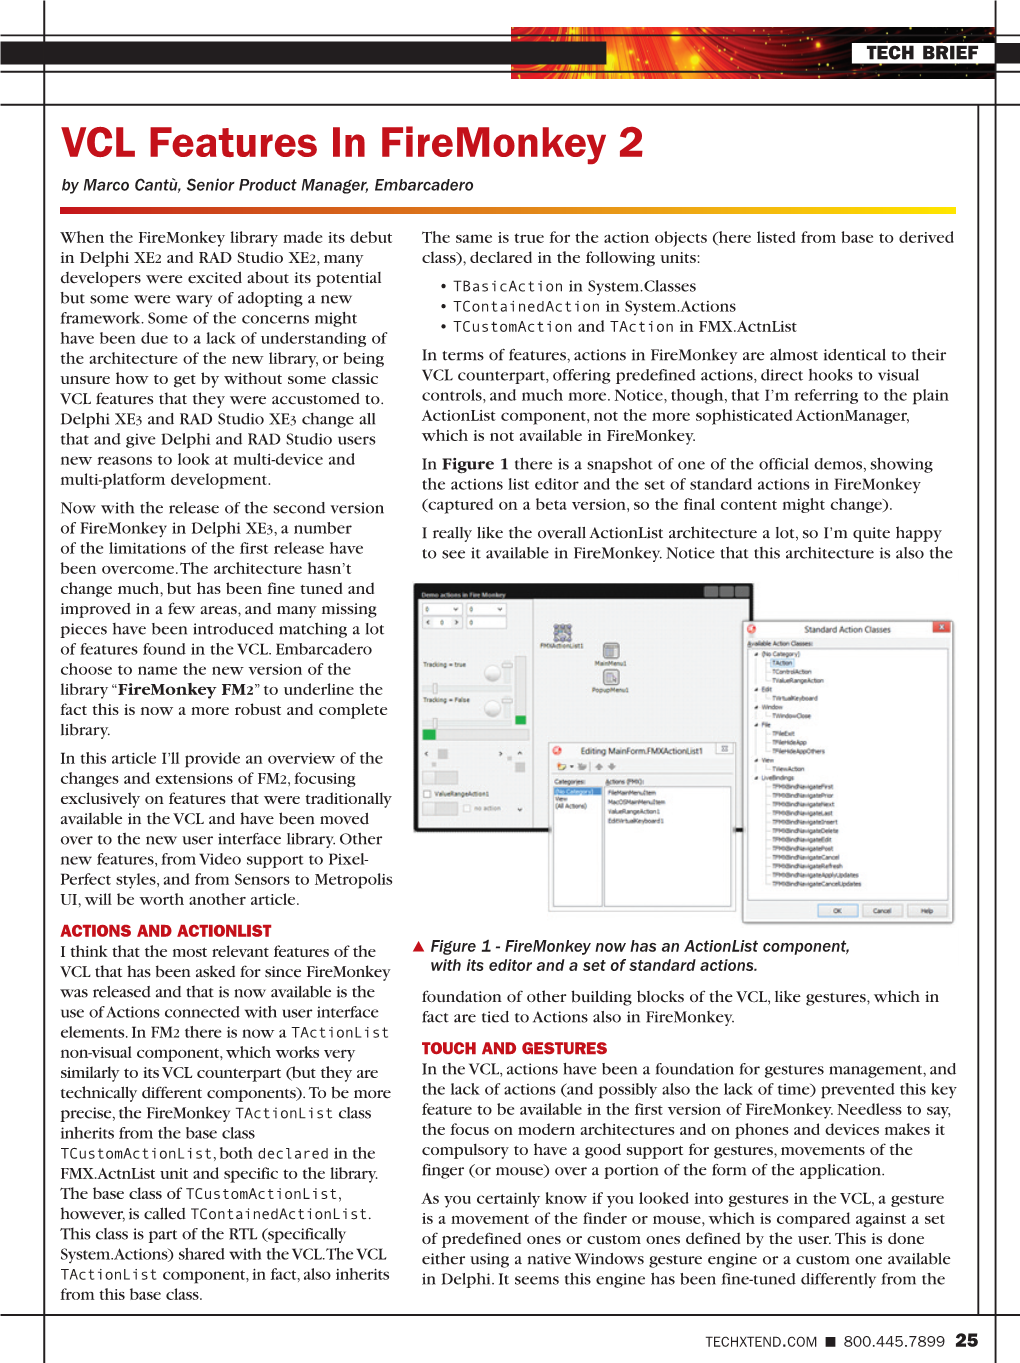 VCL Features in Firemonkey 2 by Marco Cantù, Senior Product Manager, Embarcadero